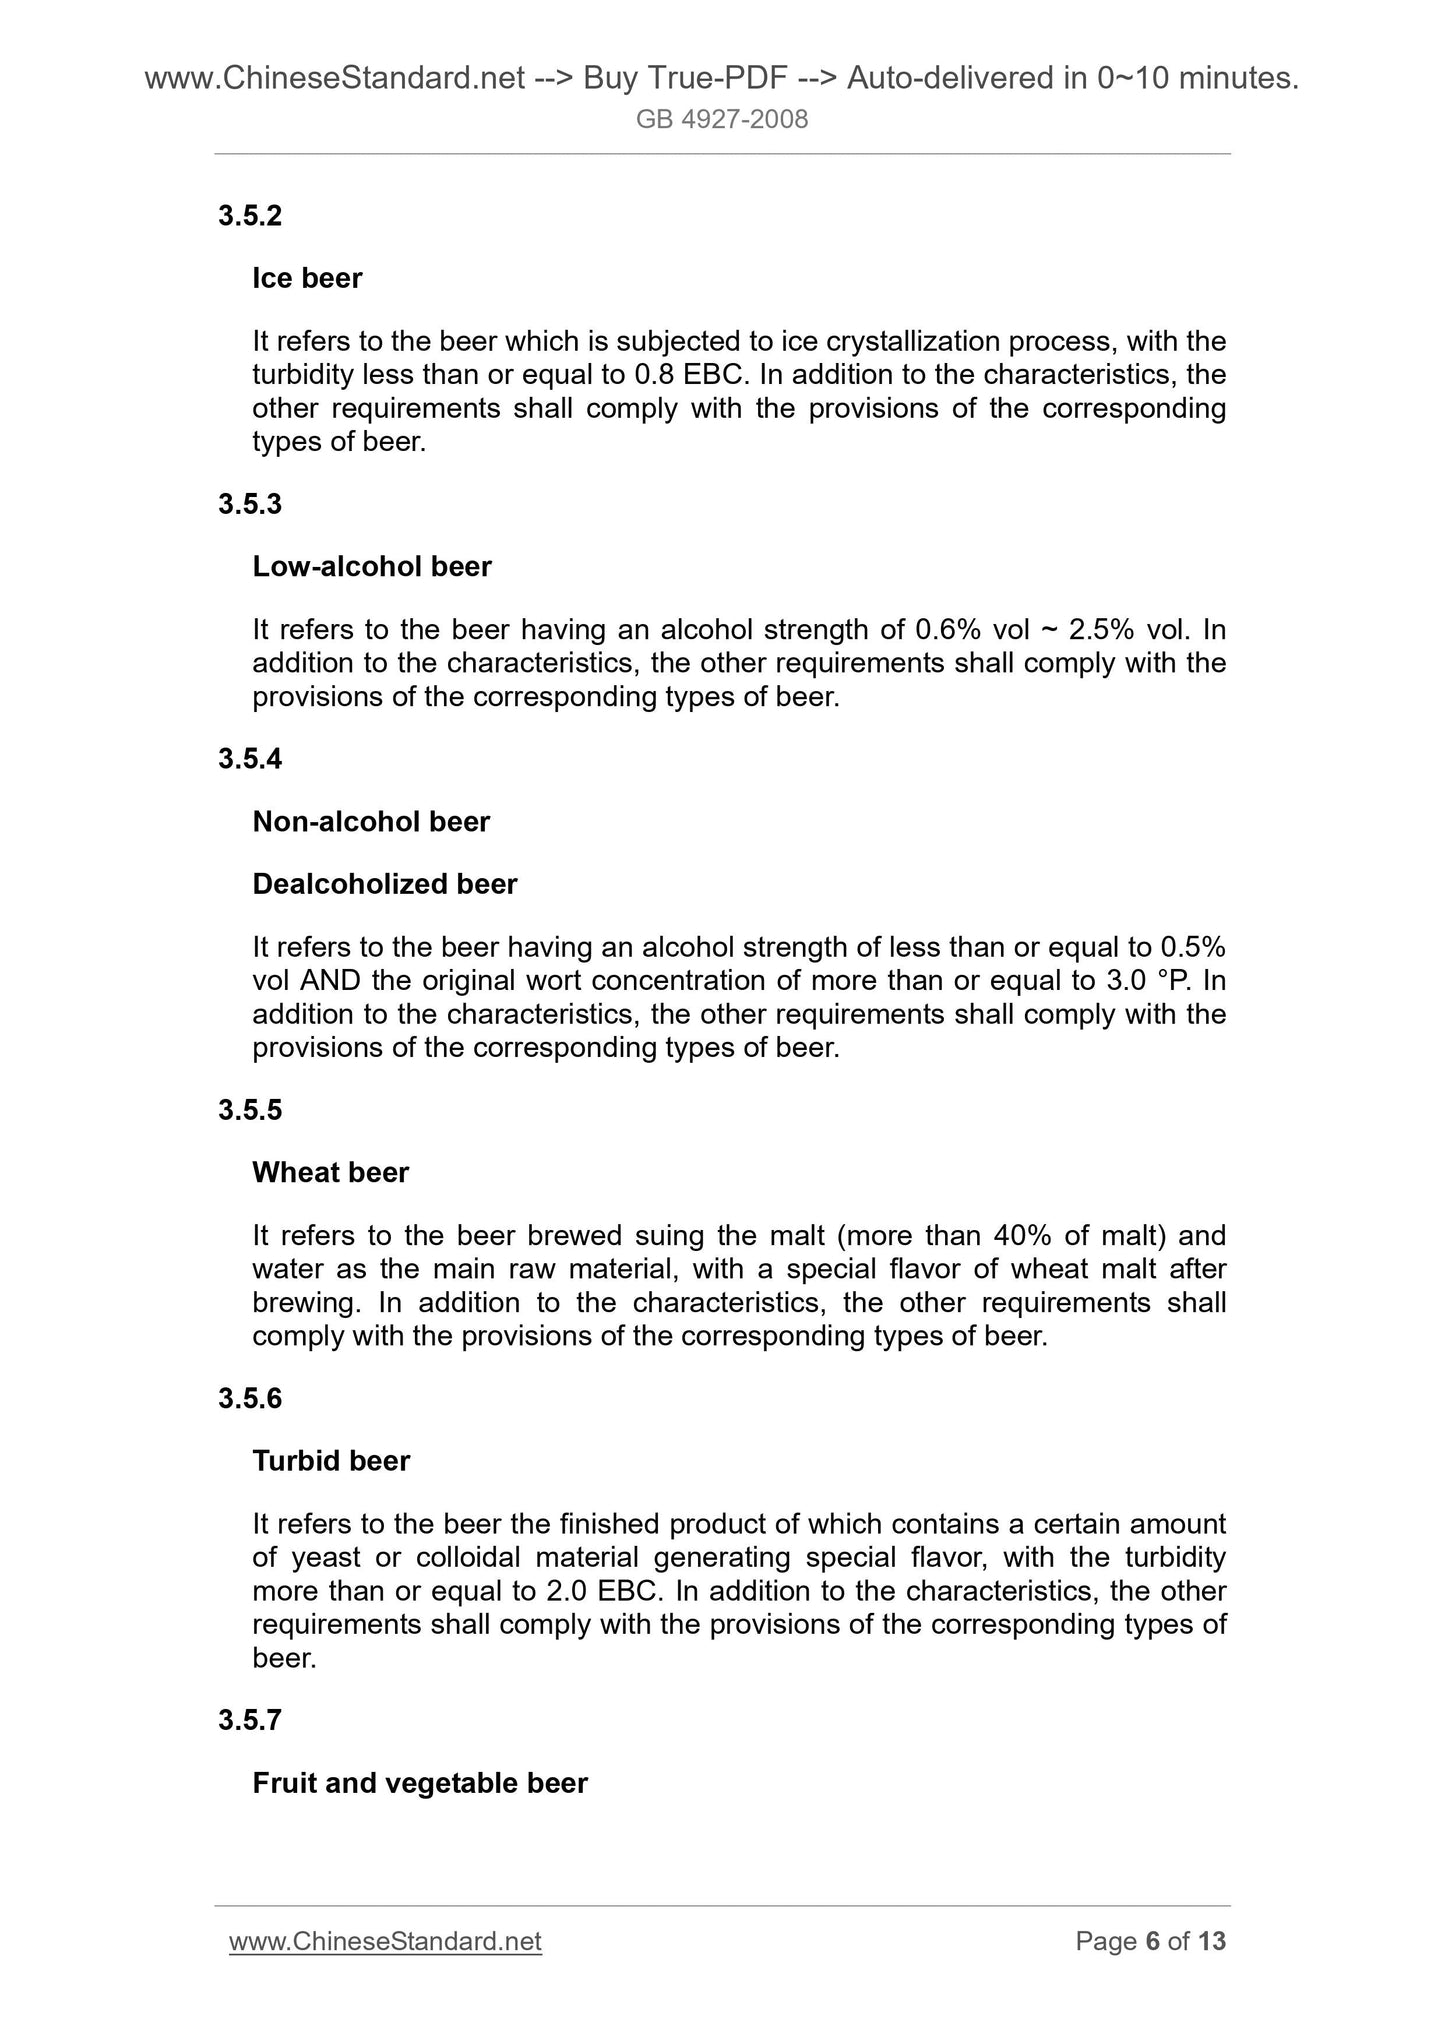 GB 4927-2008 Page 5